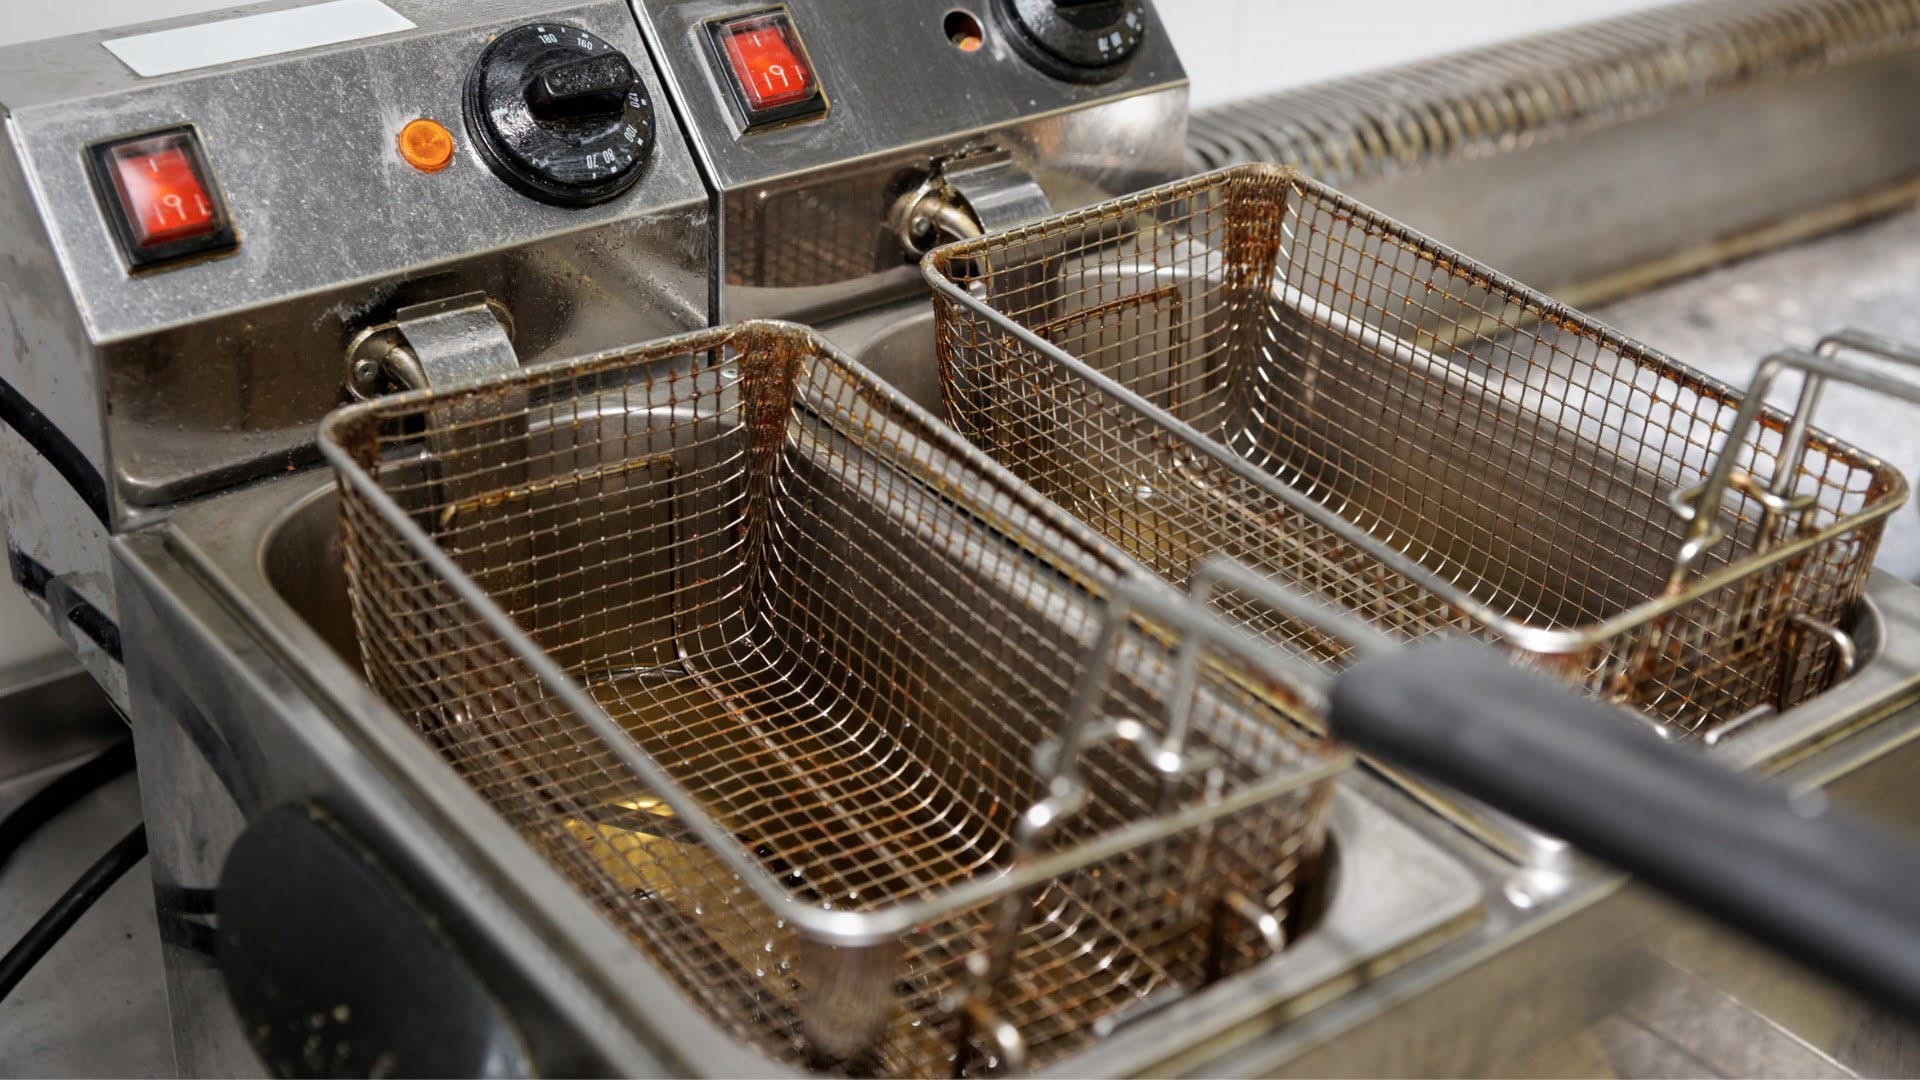 How Long Can You Keep Oil In A Deep Fryer